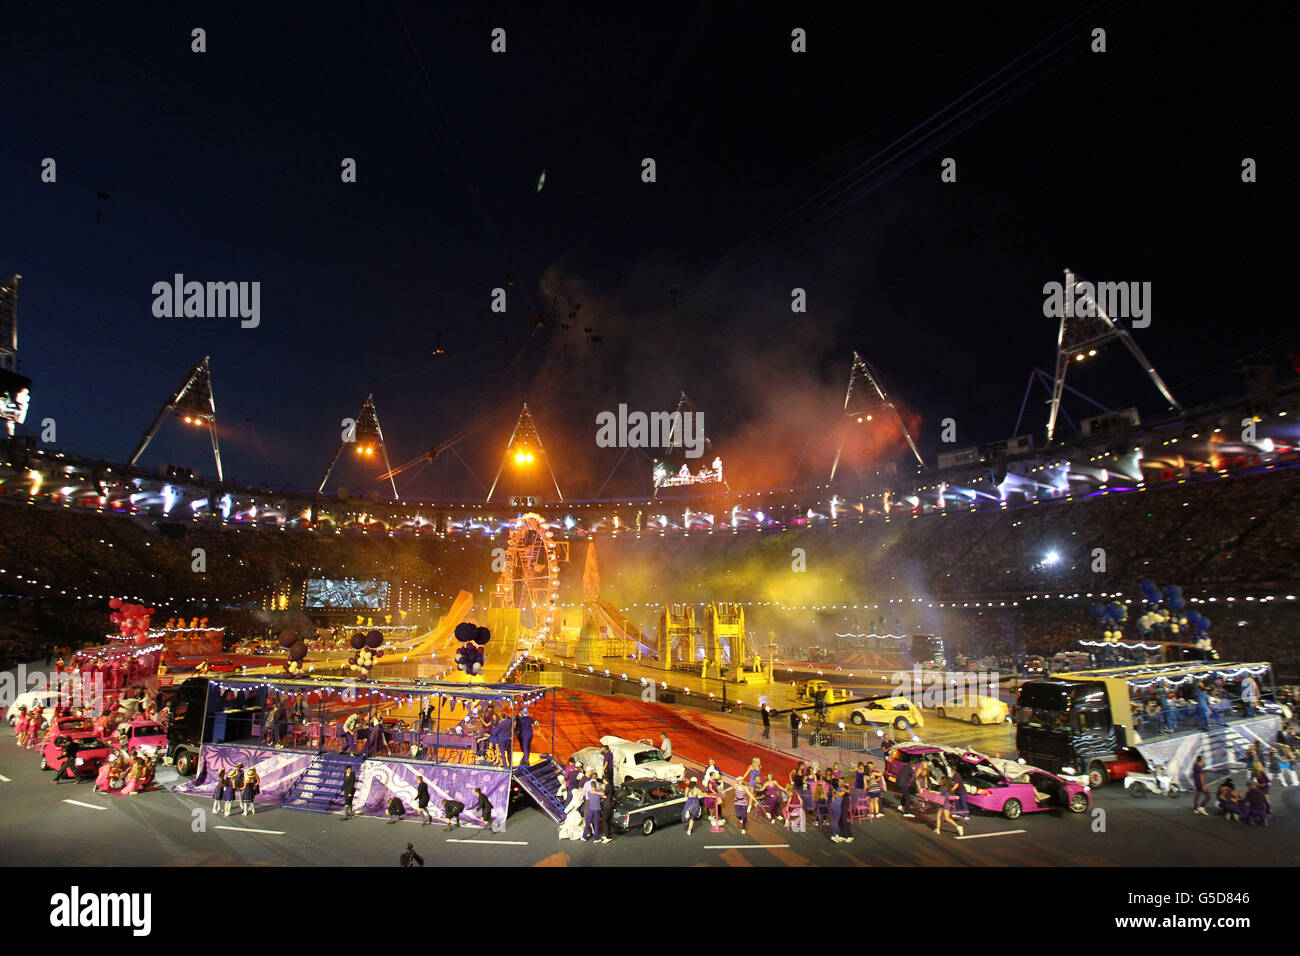 London Olympic Games - Day 16. A general view during the Olympic Games Closing Ceremony at the Olympic Stadium, London. Stock Photo